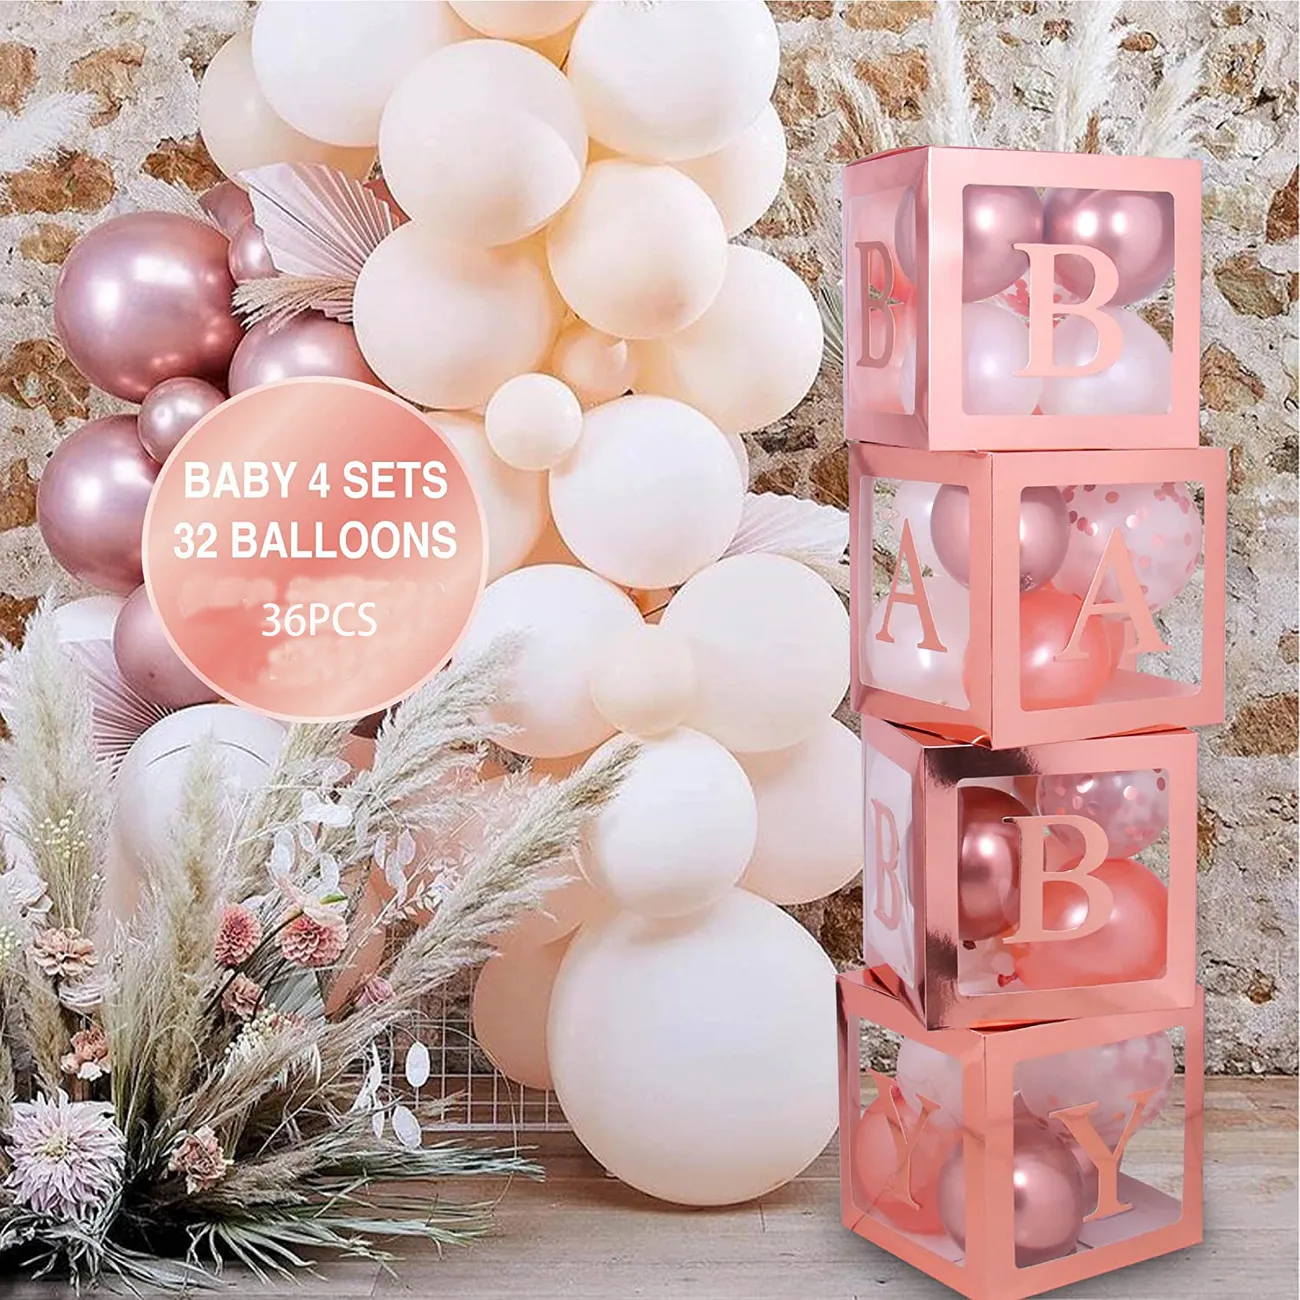 How To, DIY Baby Blocks, Party Props, Baby Shower